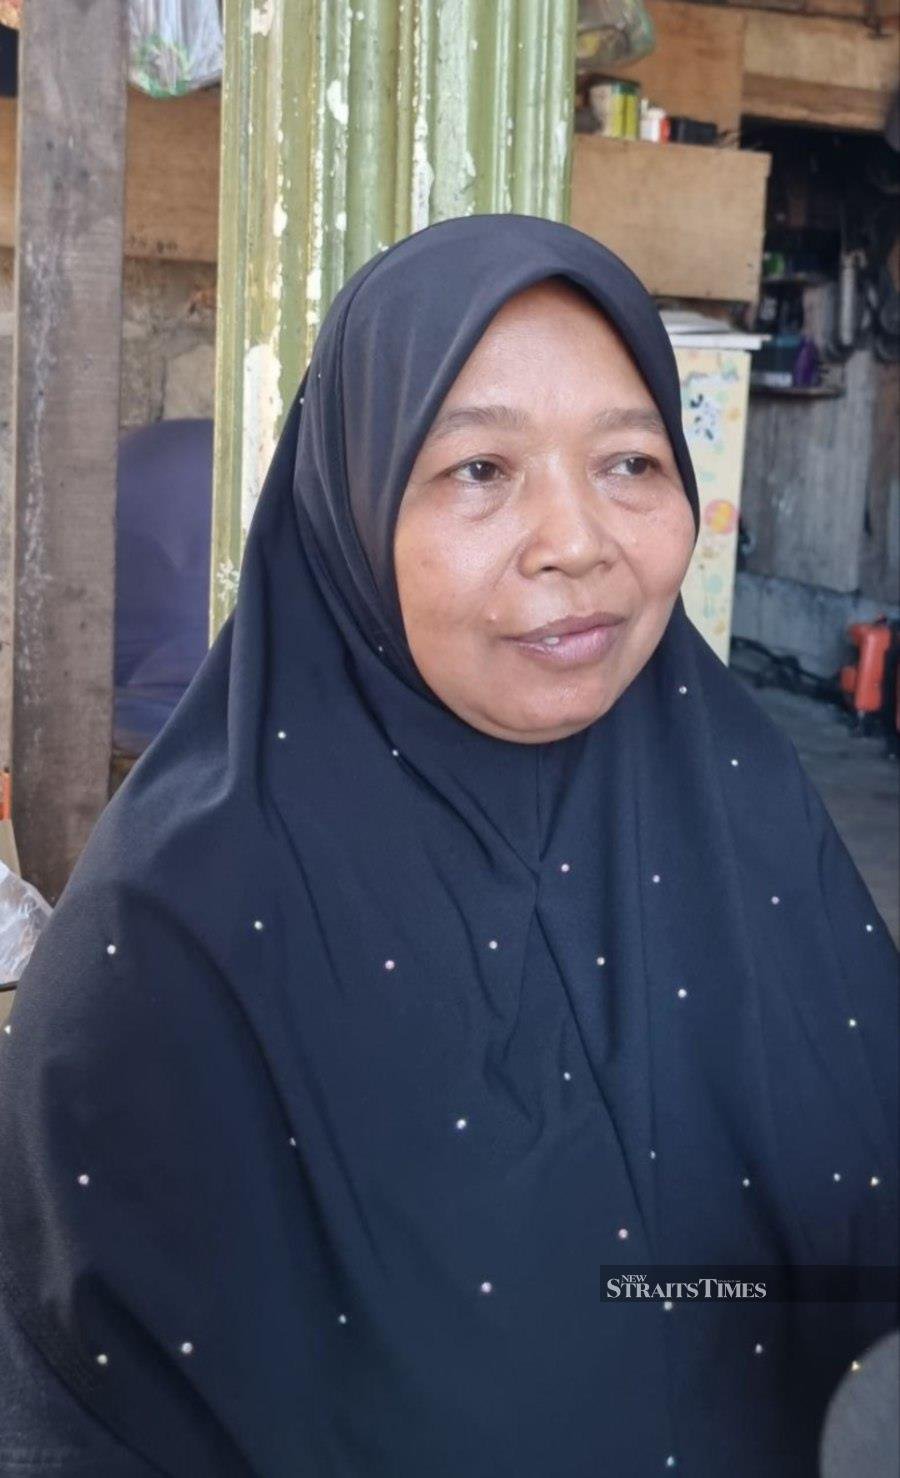 Zainun Mat Amin said that her grandson Muhamad Abeel Qaiz Faizal Fazrin was playing inside a car with his twin and two other siblings days before he died due to heat stroke. Pic by Sharifah Mahsinah Abdullah